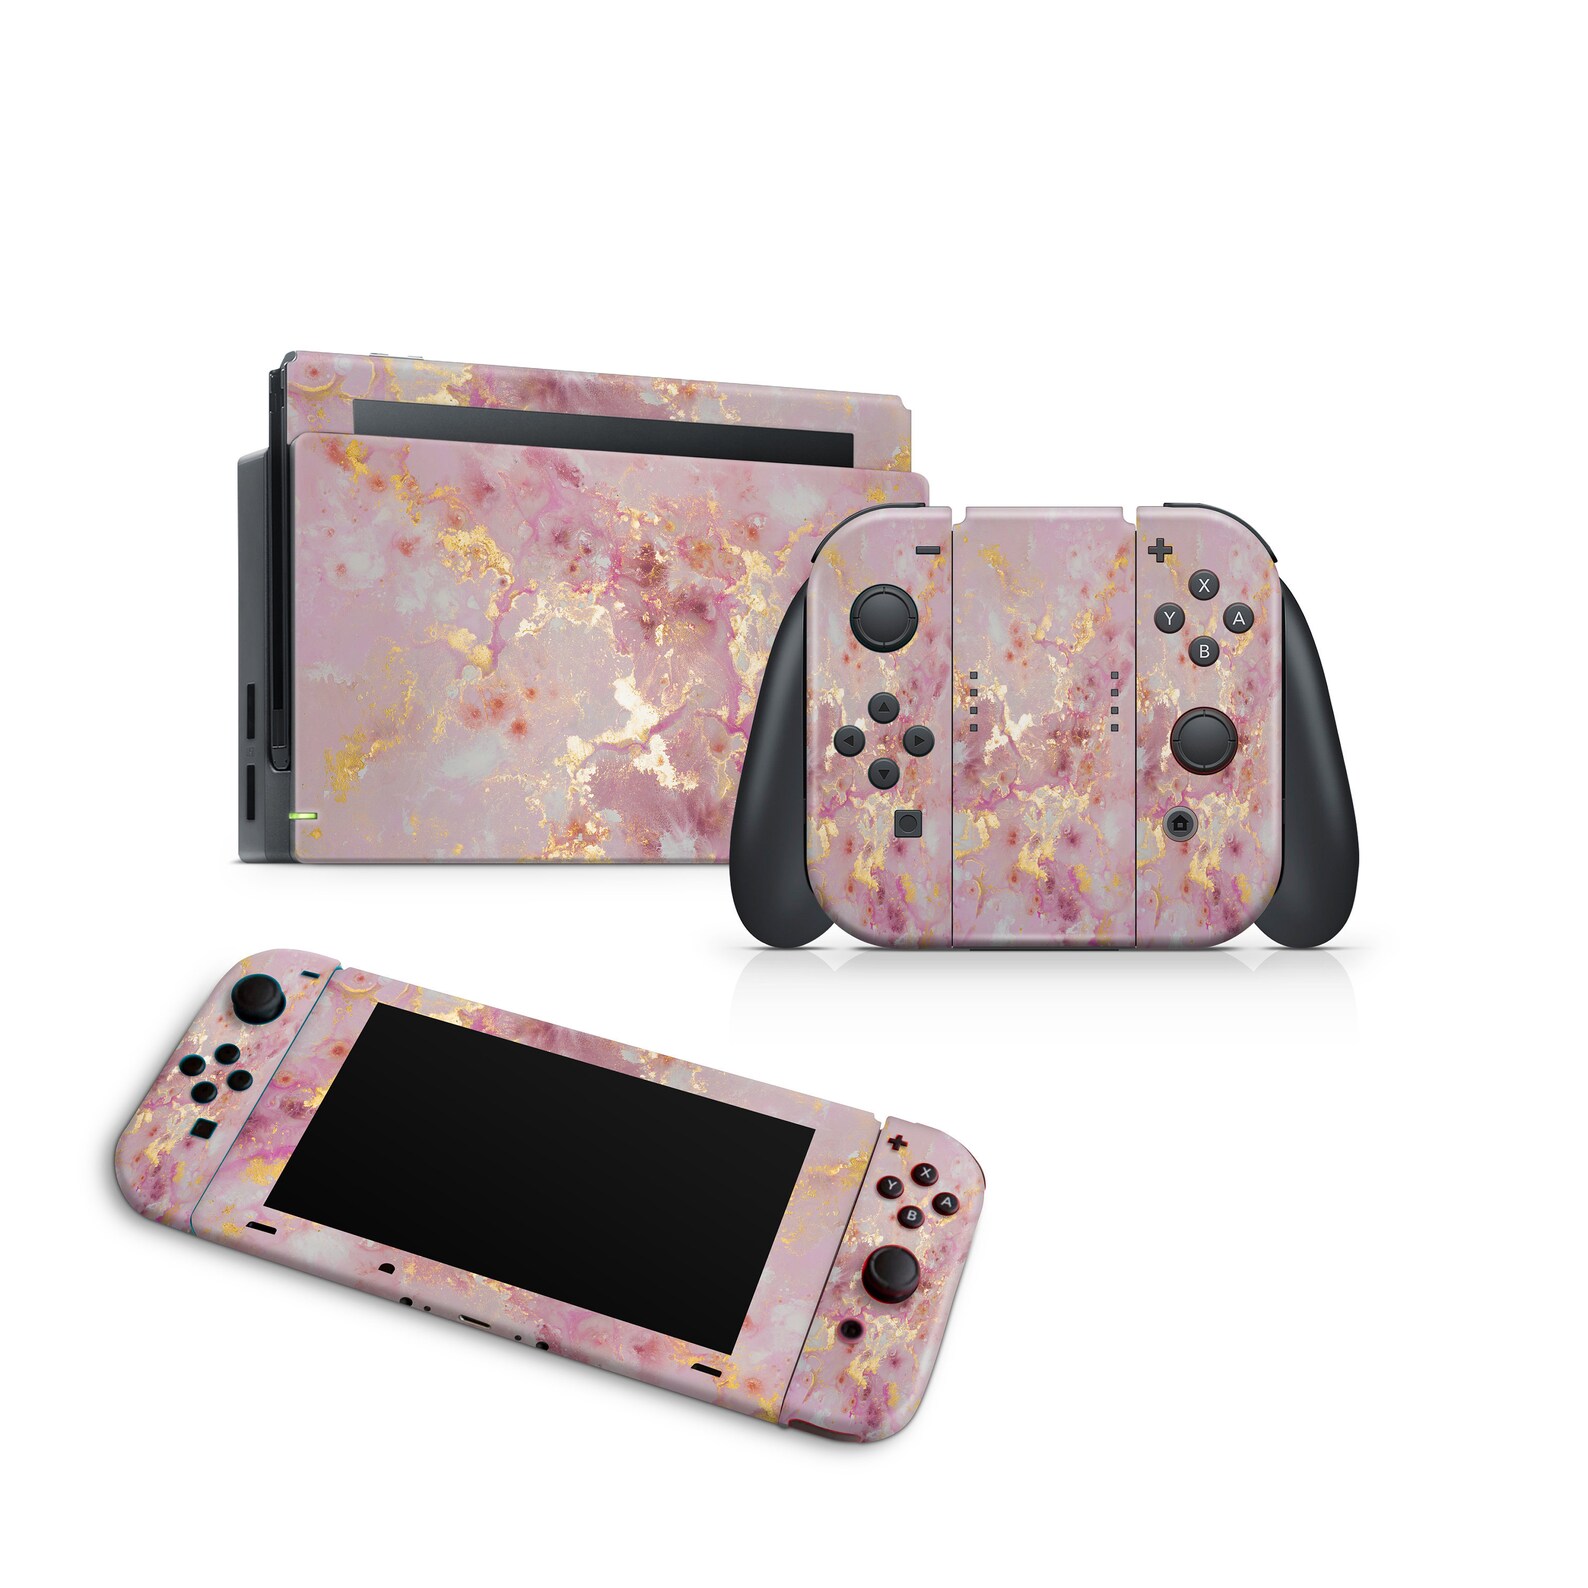 Nintendo Switch Skin Decal For Console Joy-Con And Dock | Etsy